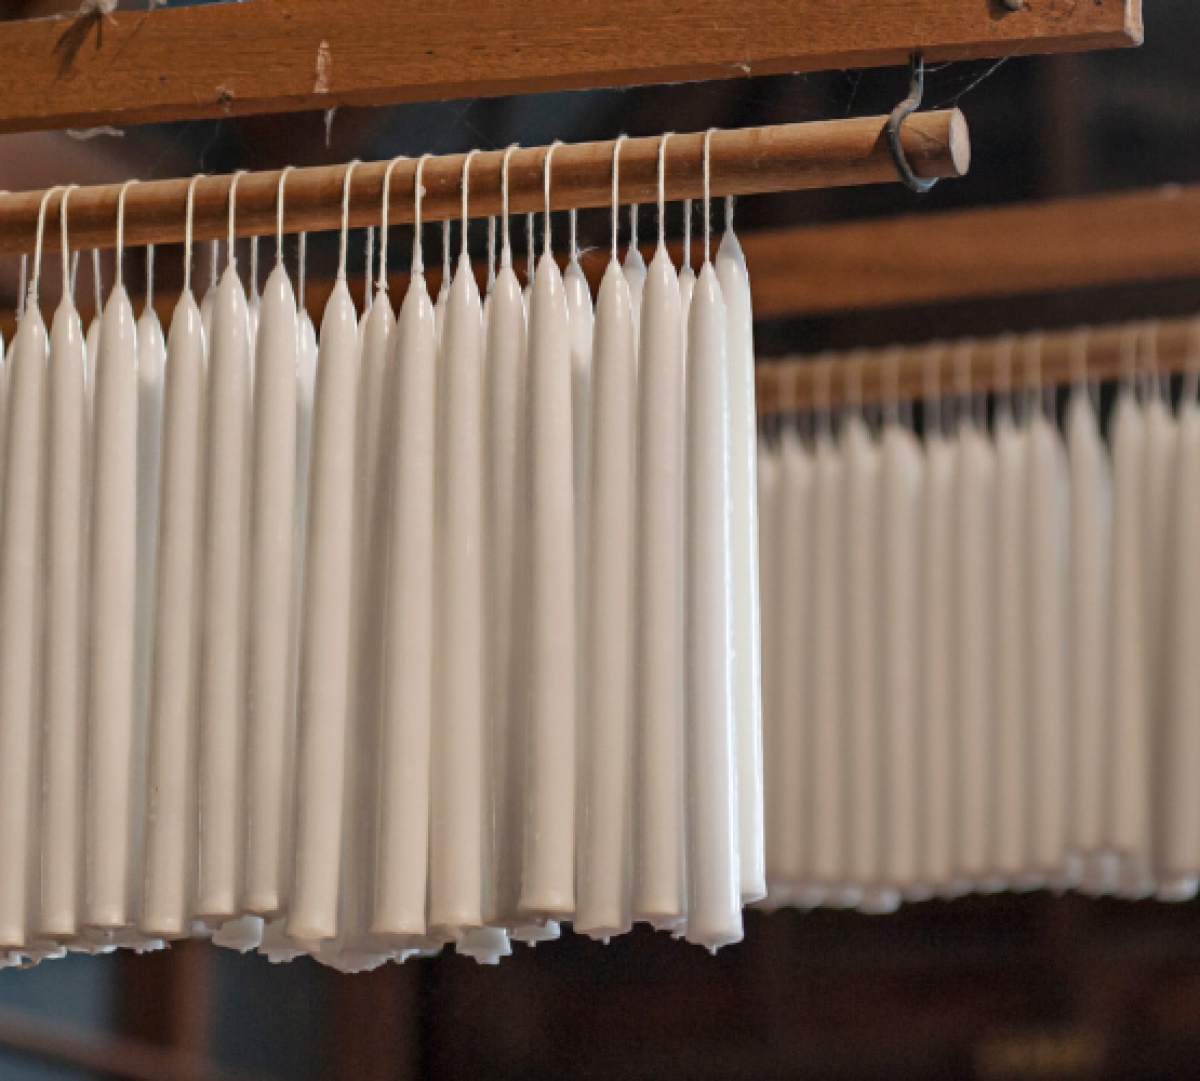 wax candlesticks hanging to dry on a wooden beam